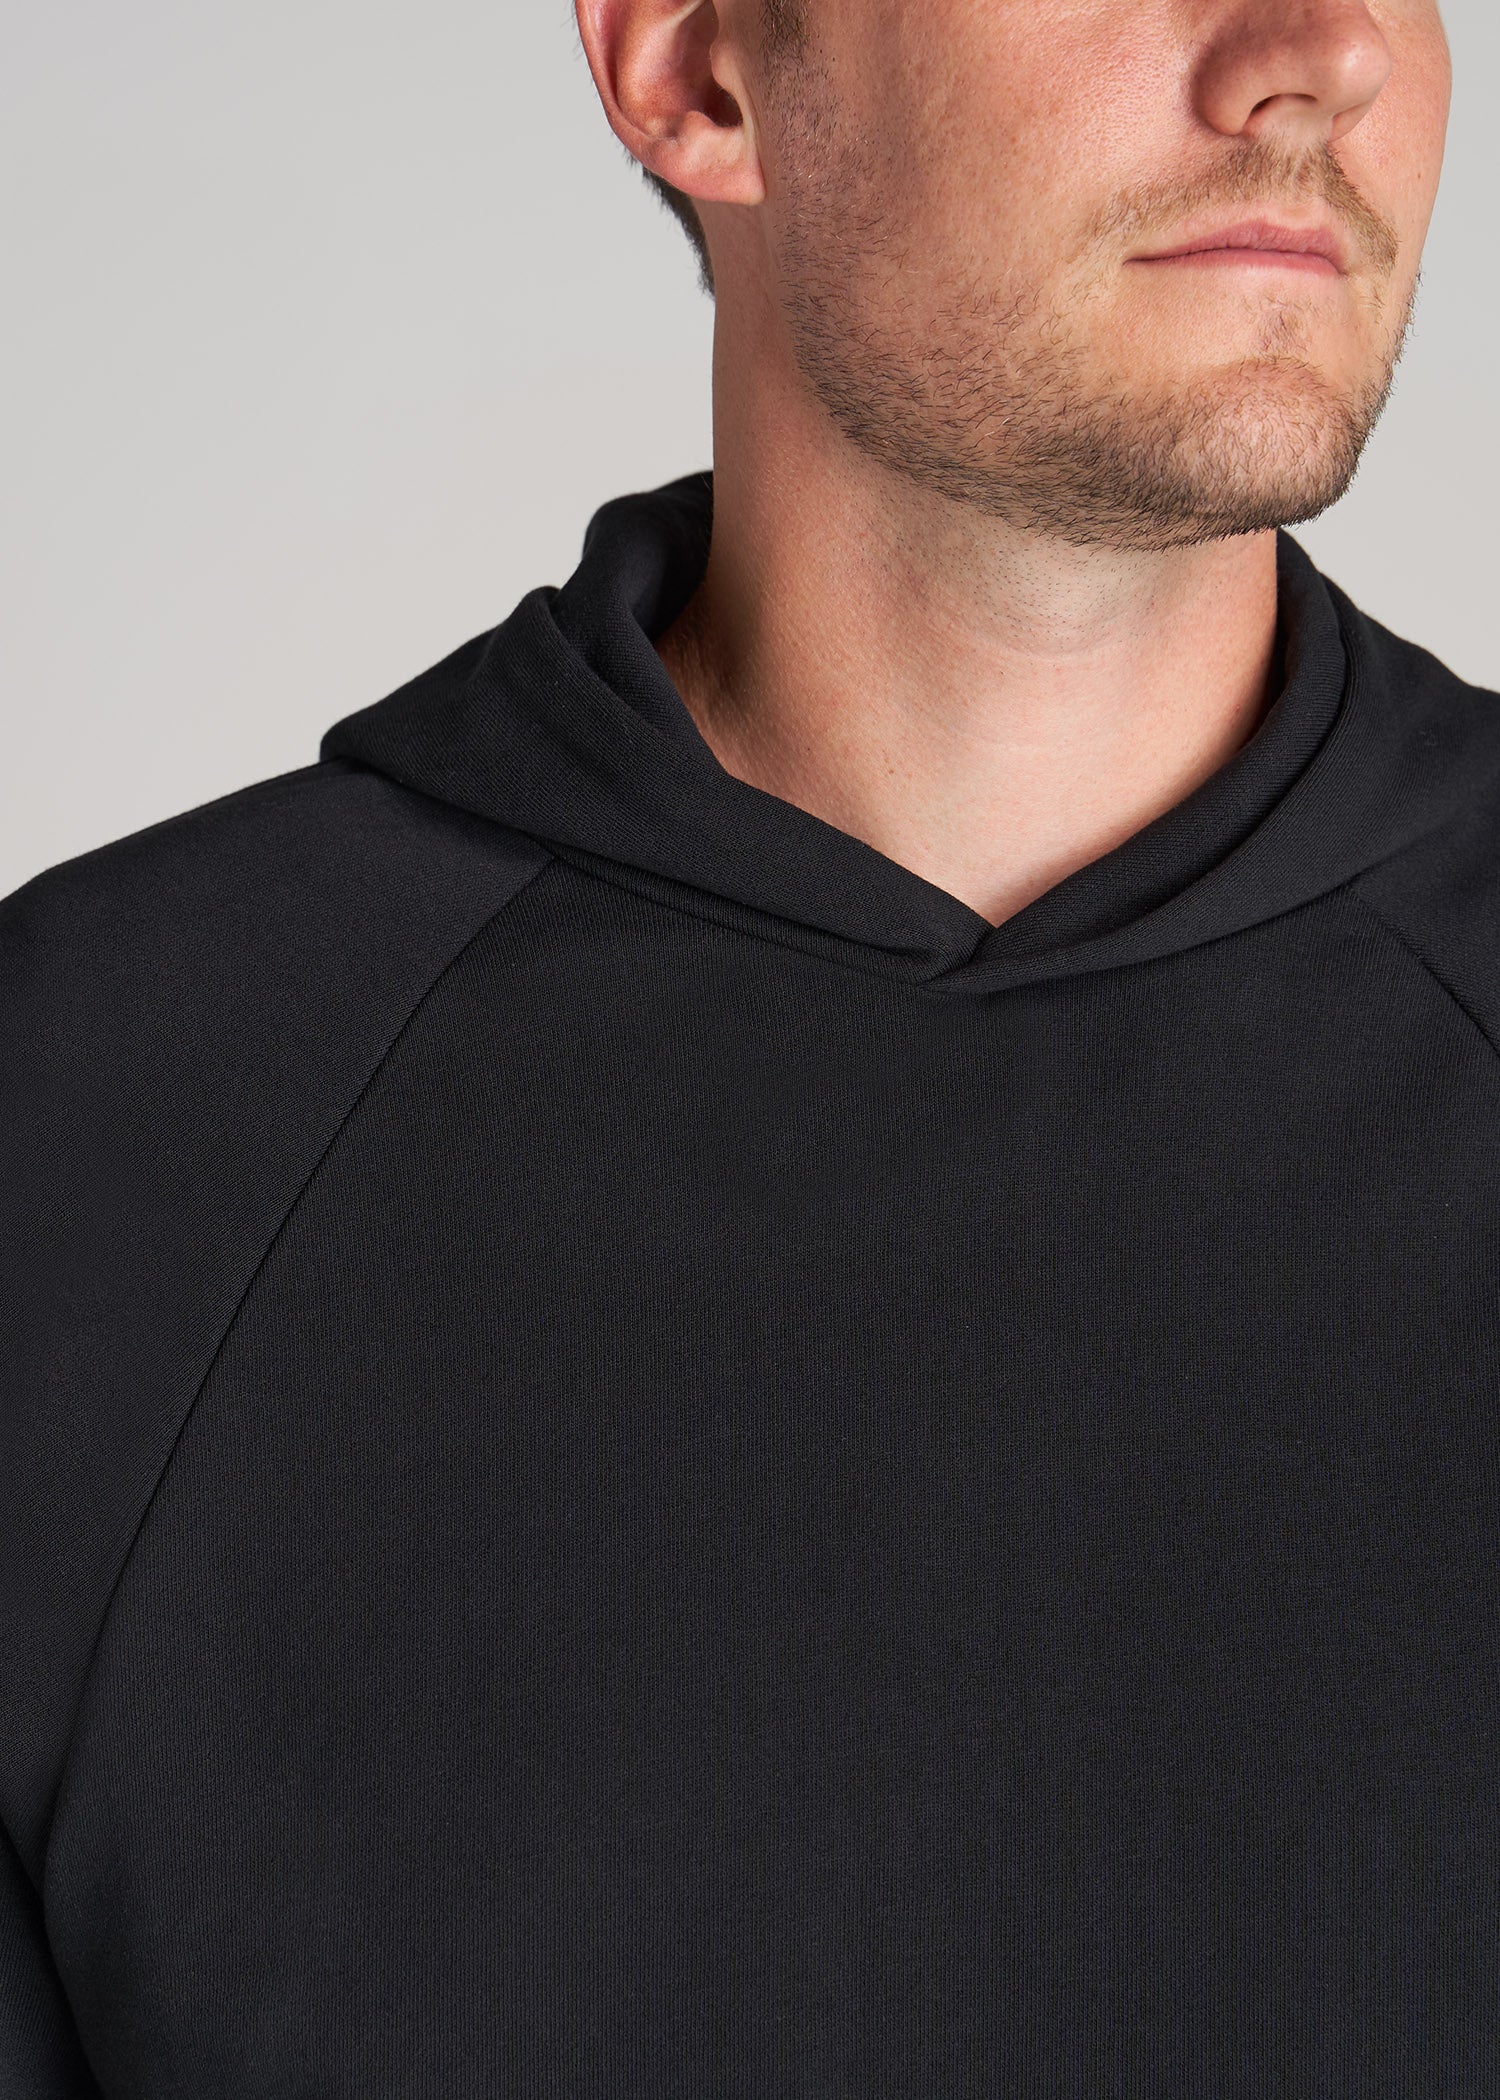 Wearever French Terry Full-Zip Men's Tall Hoodie in Black L / Tall / Black